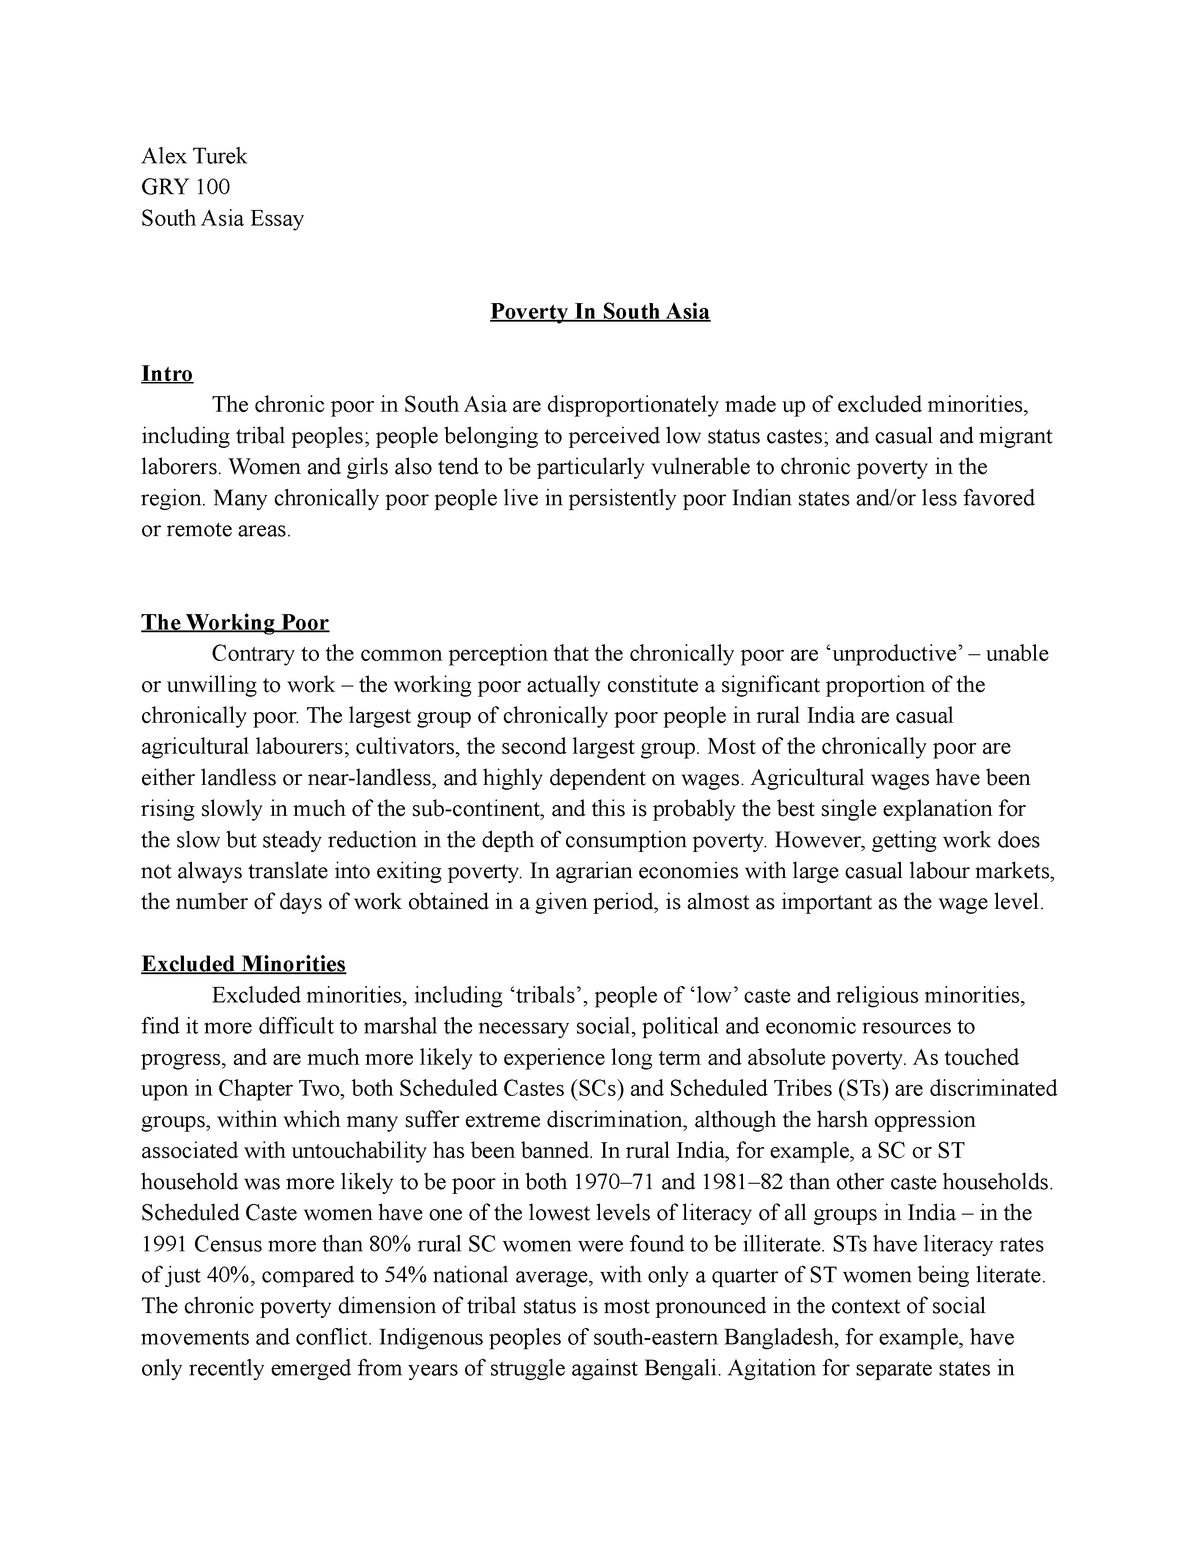 South Asia Essay - A - Alex Turek GRY 100 South Asia Essay Poverty In ...